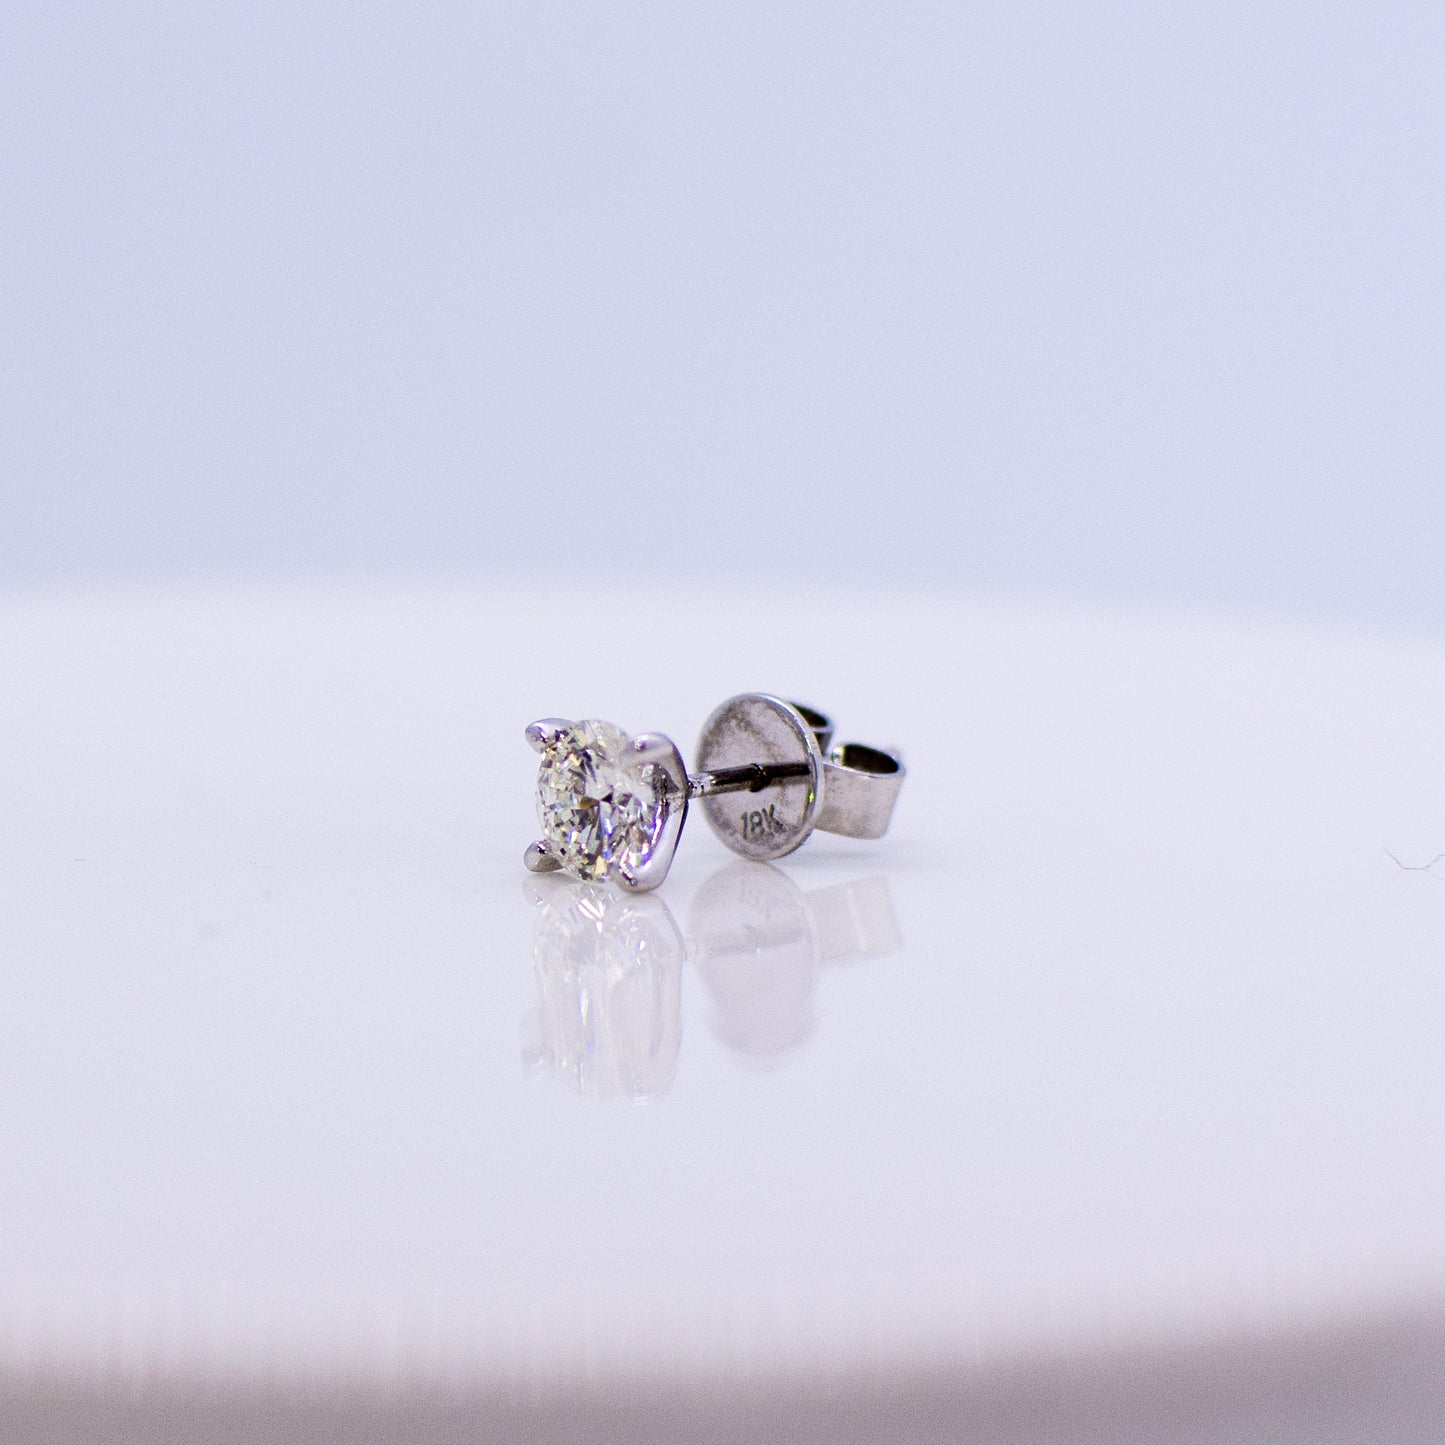 18ct White Gold 1ct Diamond Stud Earrings Each diamond is set in a classic four claw setting.  1ct in total approximately.  18ct white gold stud earrings with butterfly backs.